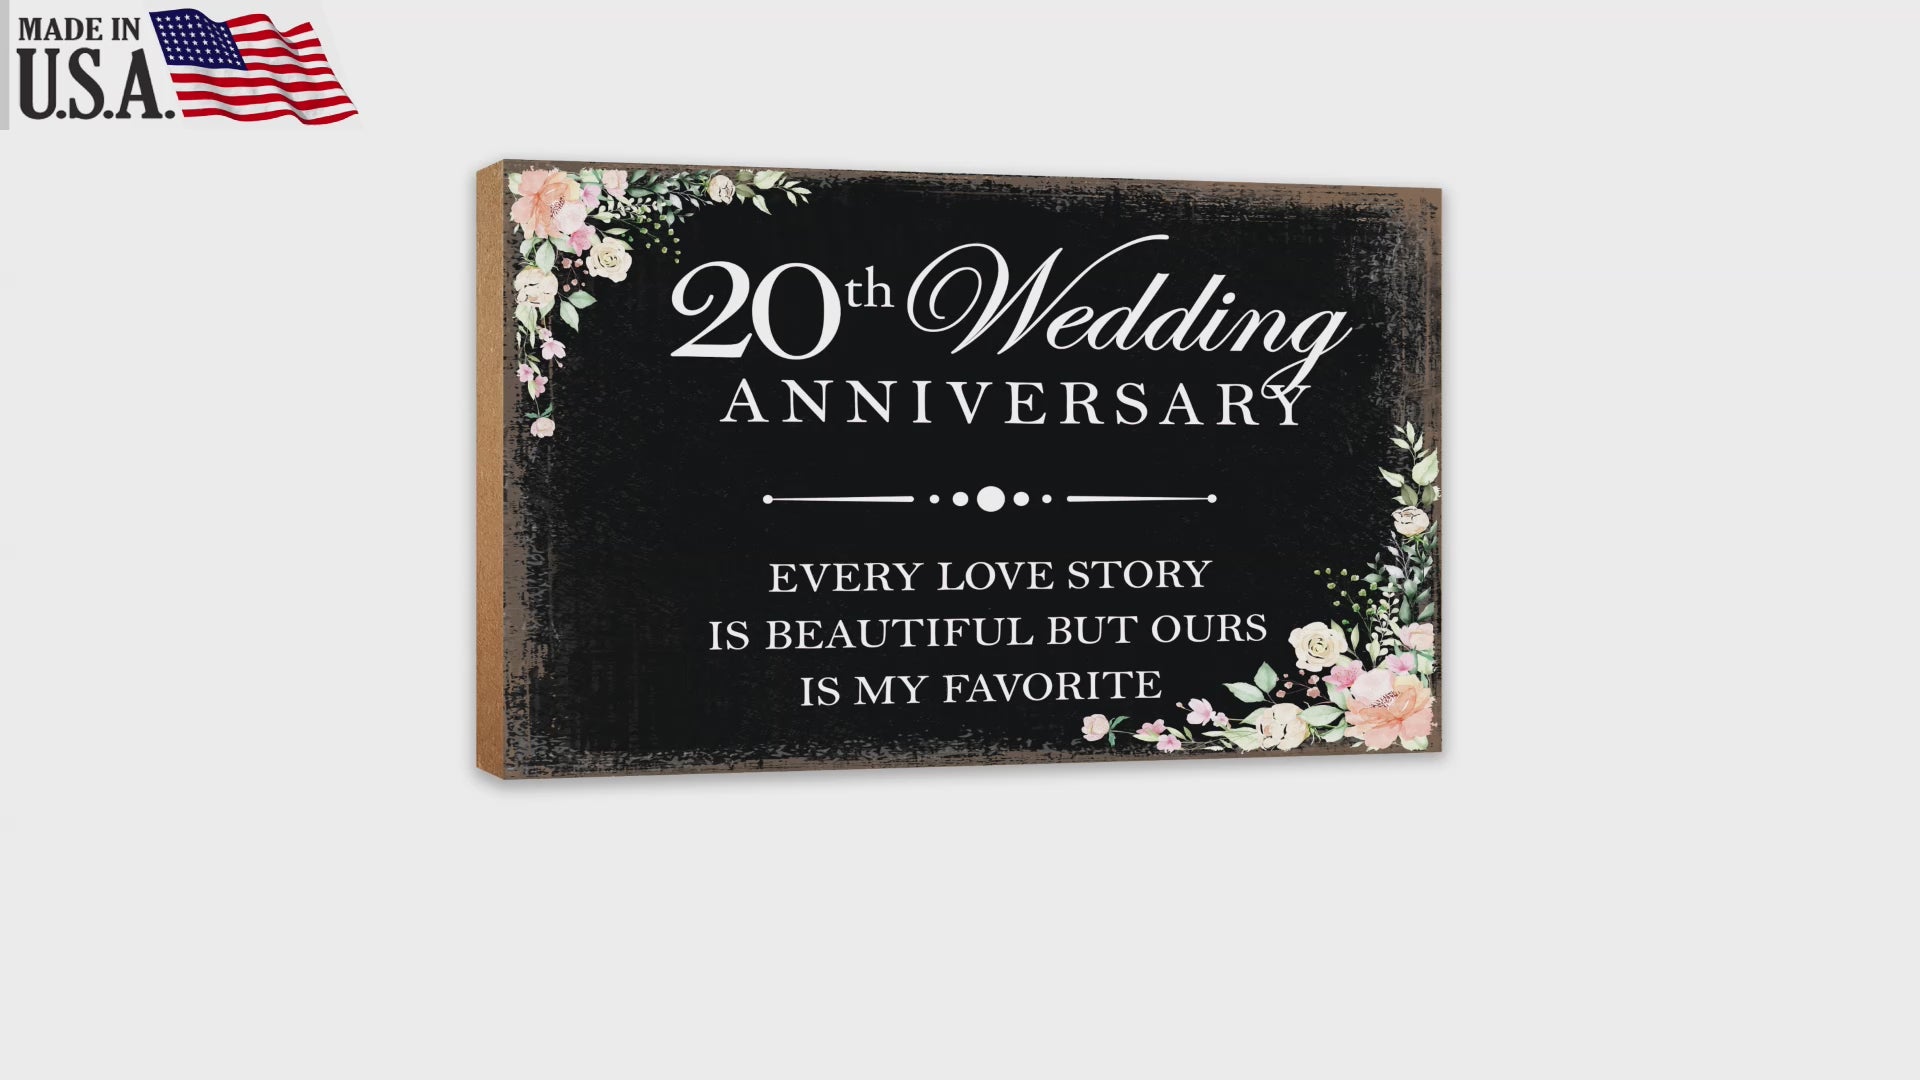 20th Wedding Anniversary Unique Shelf Decor and Tabletop Signs Gifts for Couples - Every Love Story